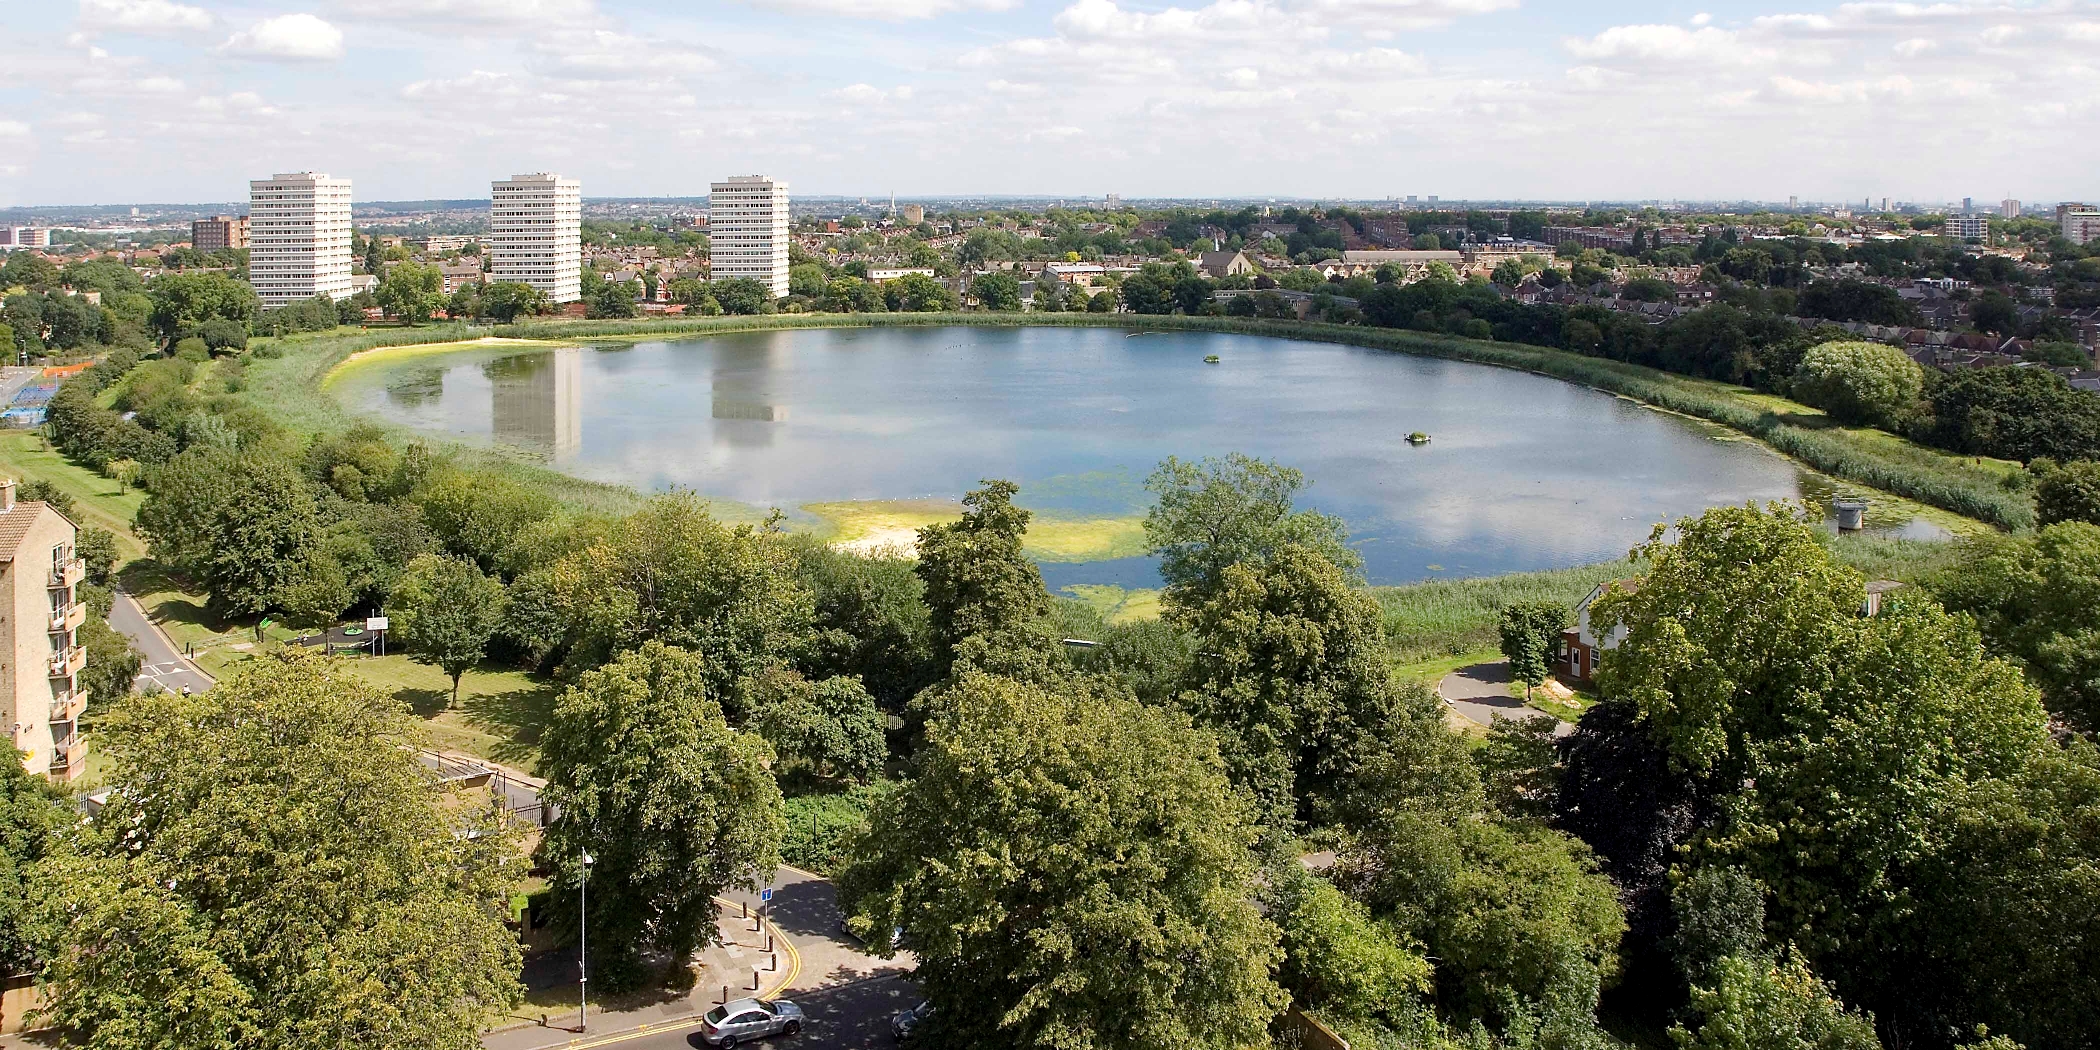 Woodberry Wetlands from the air